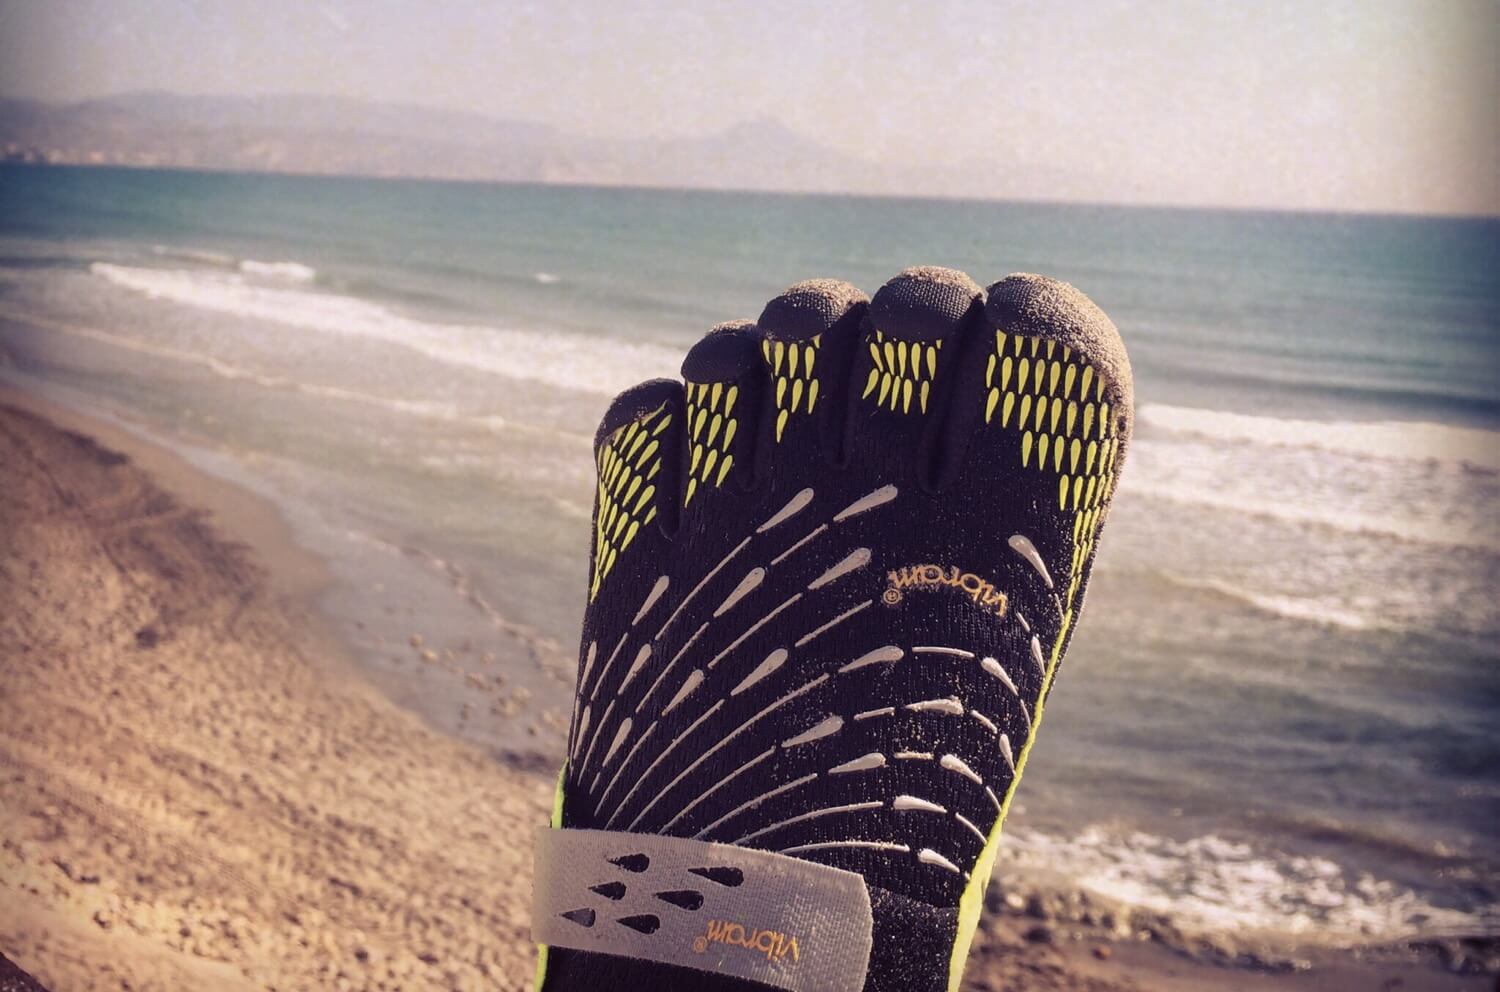 Why running almost barefoot with Vibram FiveFingers is good for my health and fitness.